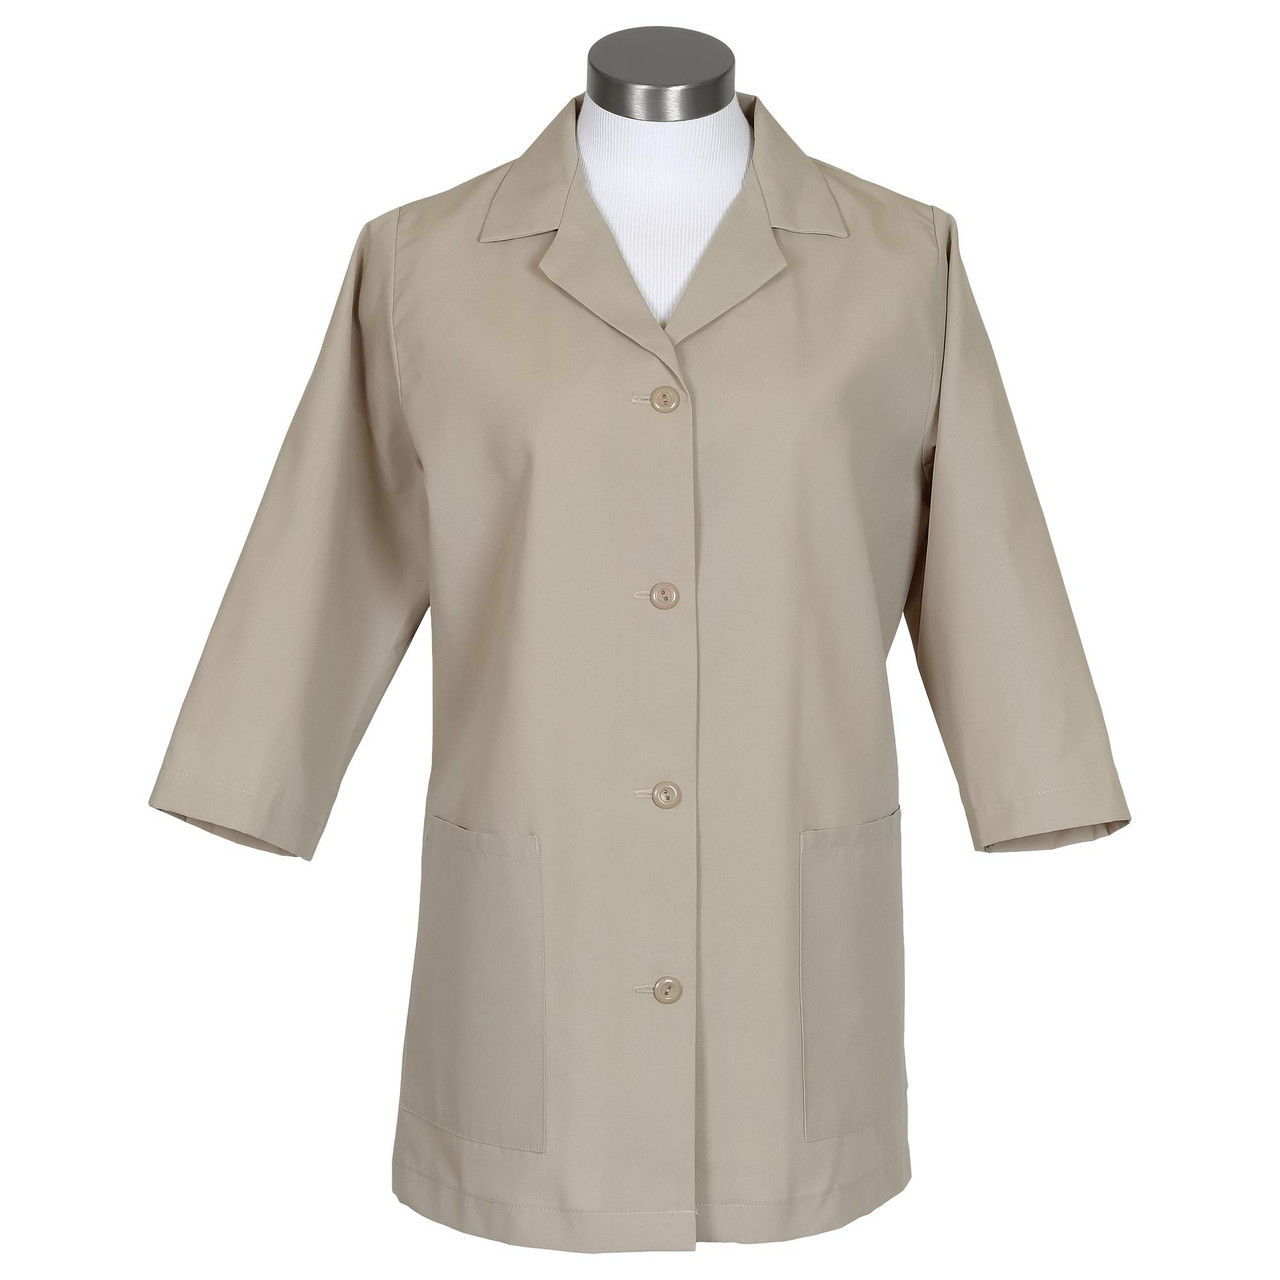 Can you specify the type of closure that the tan smock, Fame 72 for females, has?